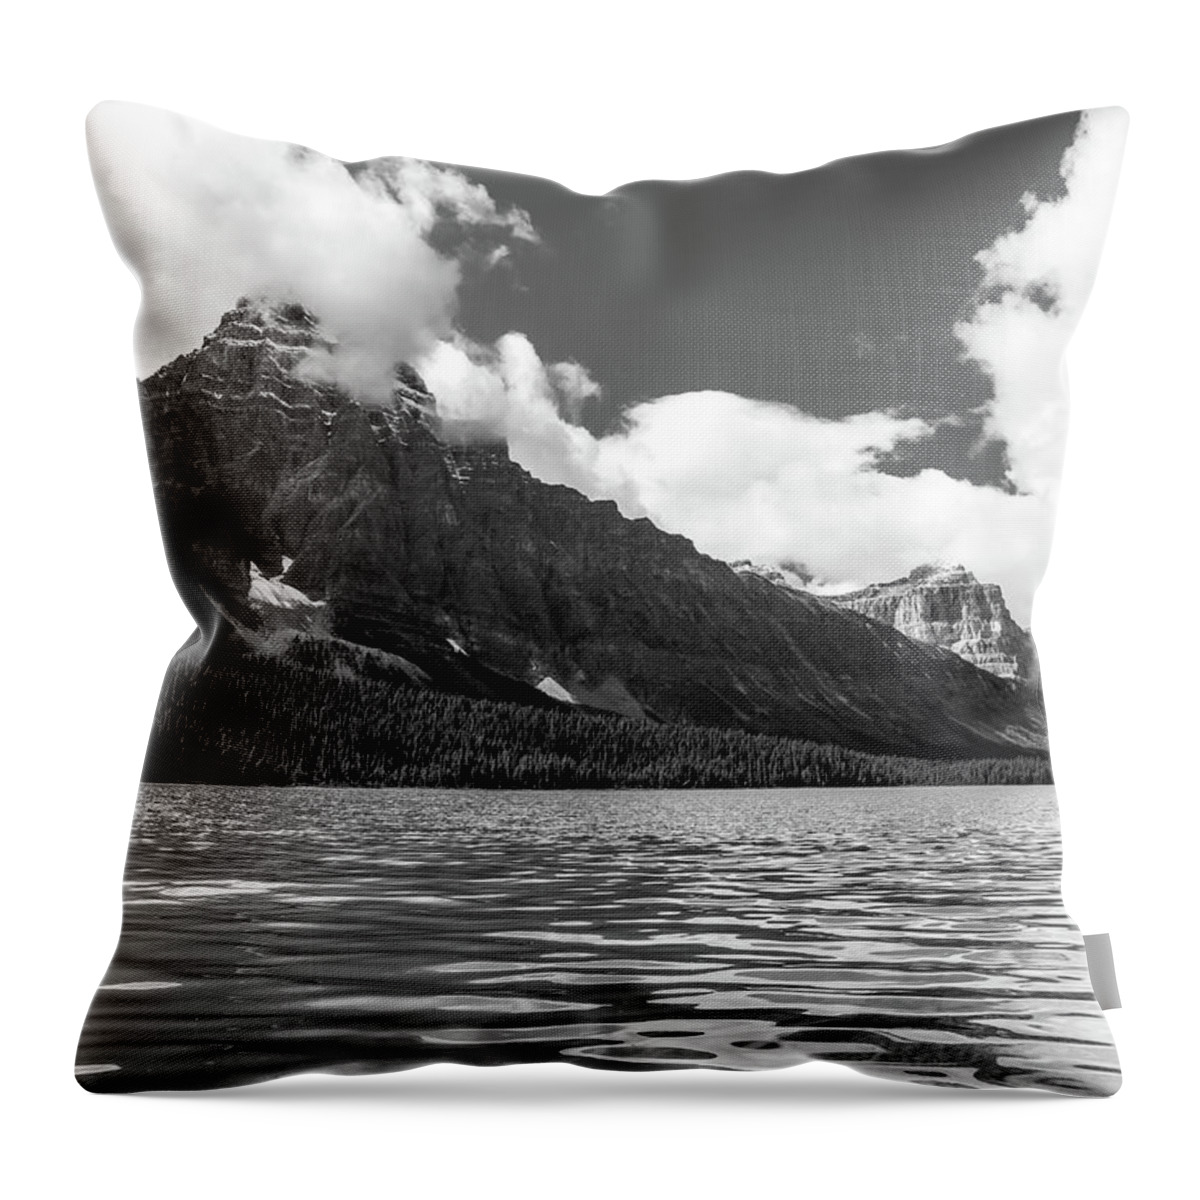 Waterfowl Lake Black And White Throw Pillow featuring the photograph Waterfowl Lake Black And White by Dan Sproul